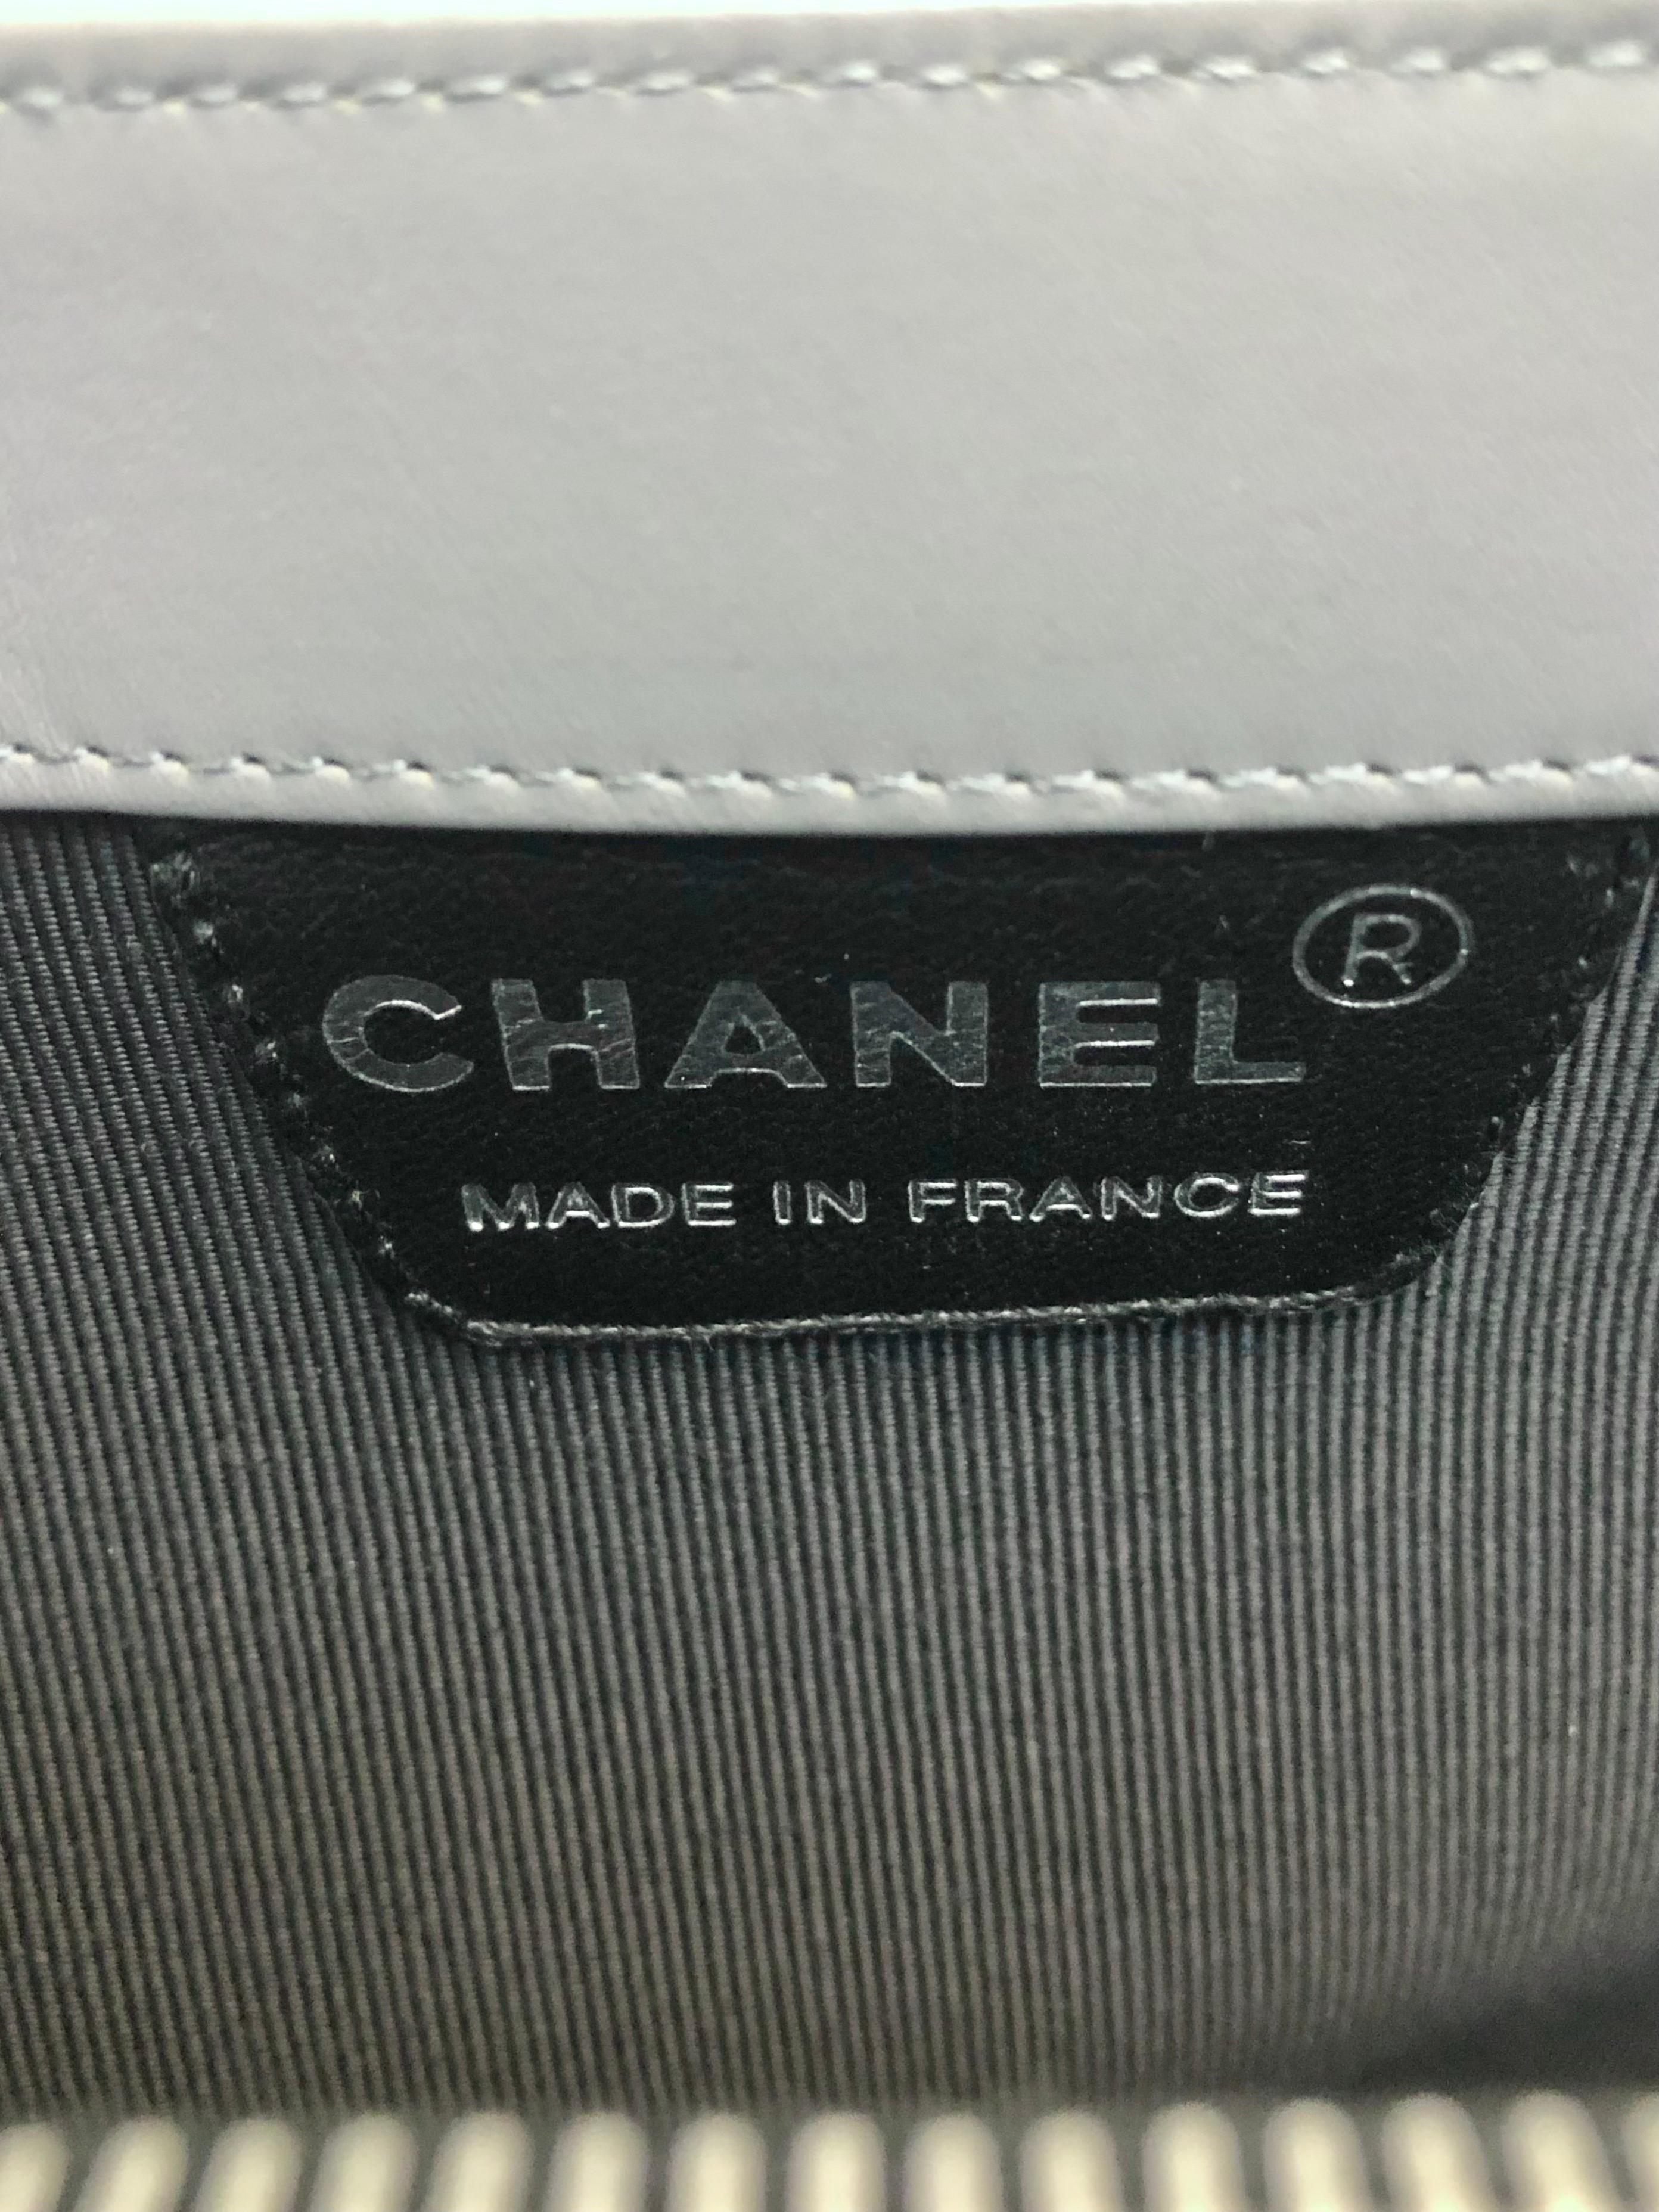 Chanel Grey Lambskin Chocolate Bar Silver Toned Hardware Handle Bag For Sale 1